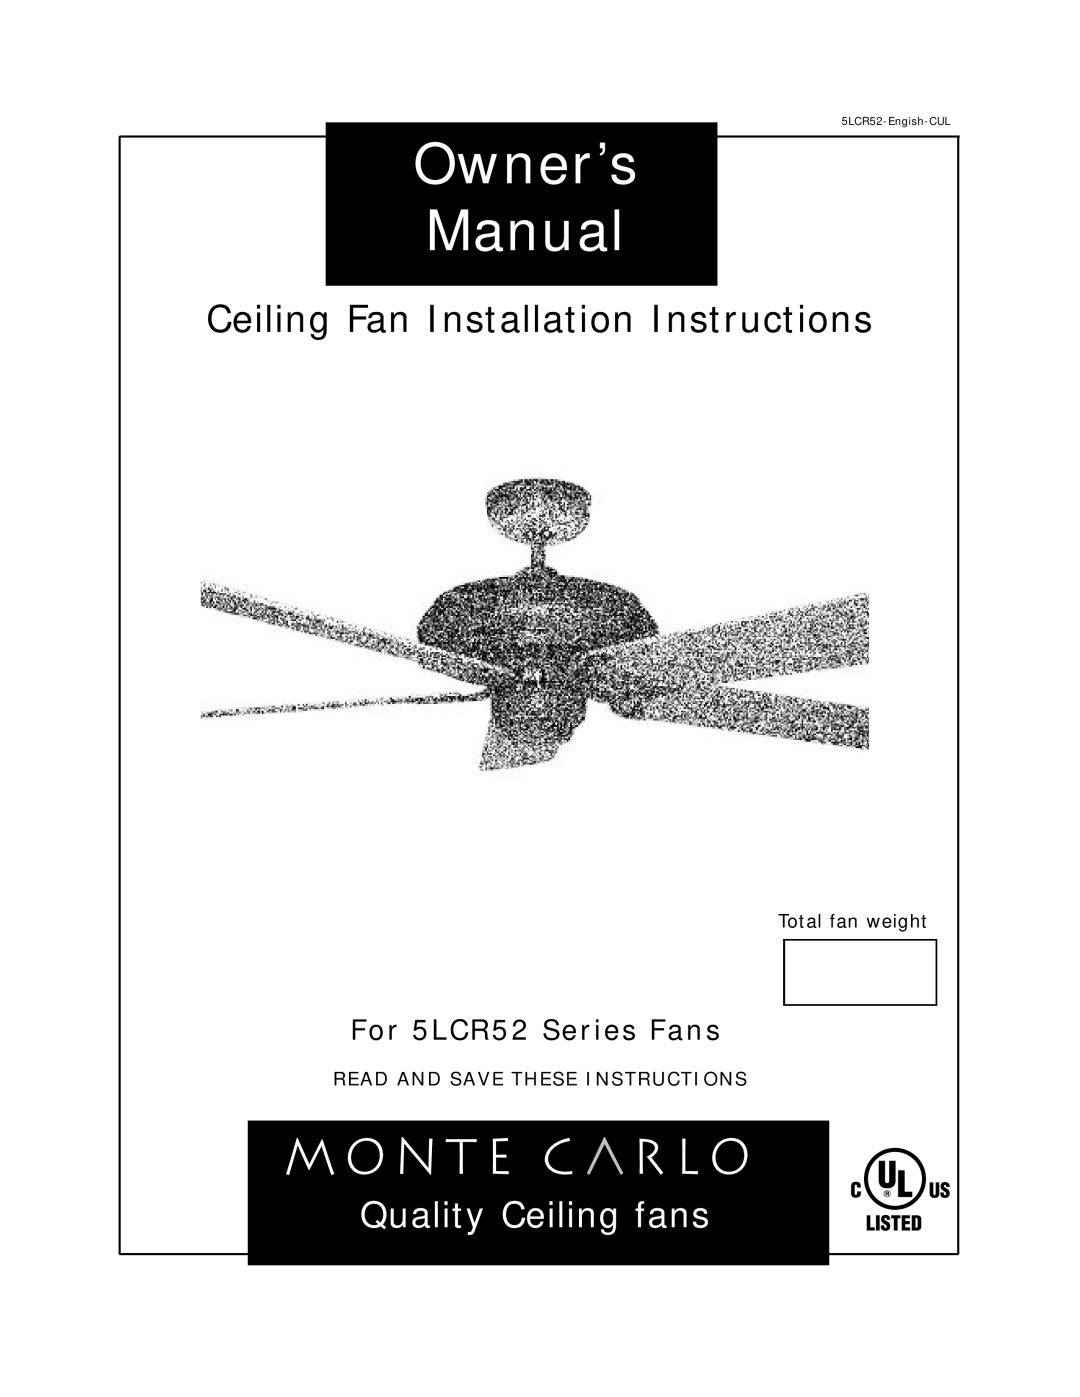 Monte Carlo Fan Company 5LCR52 owner manual Read And Save These Instructions, Ceiling Fan Installation Instructions 